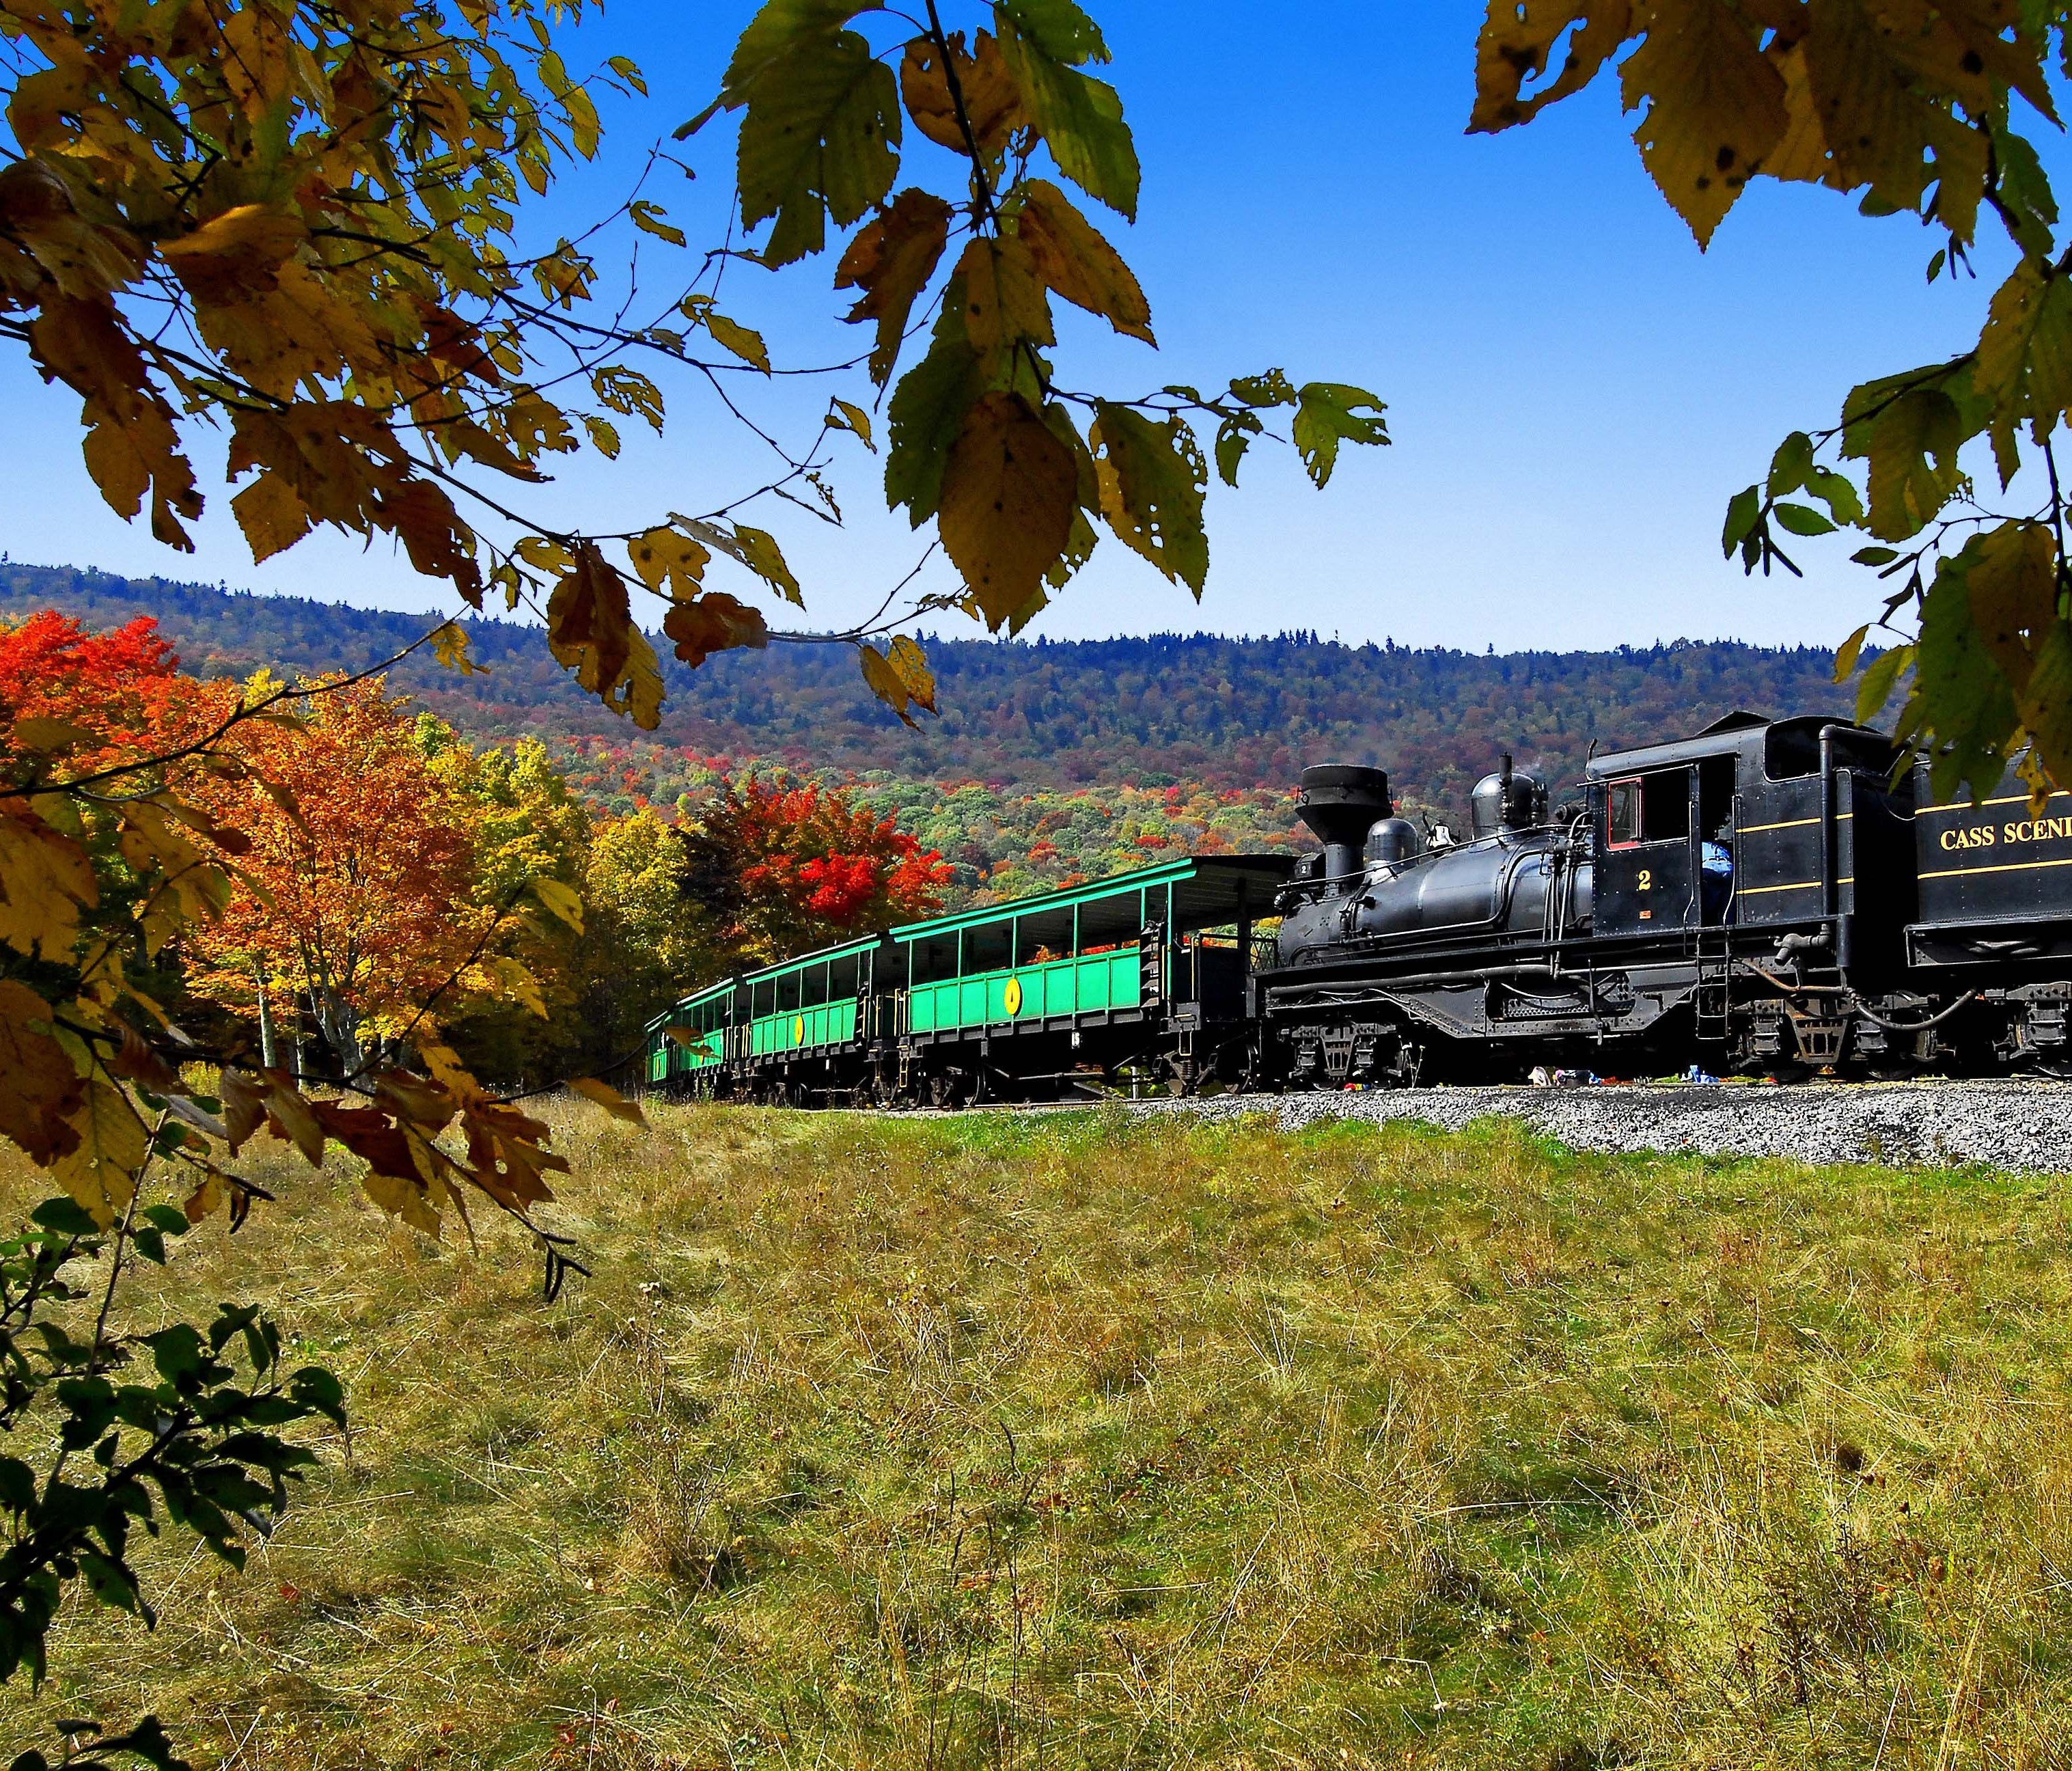 The Cass Scenic Railroad carries visitors on a historic rail line that once hauled lumber out of West Virginia's mountains.